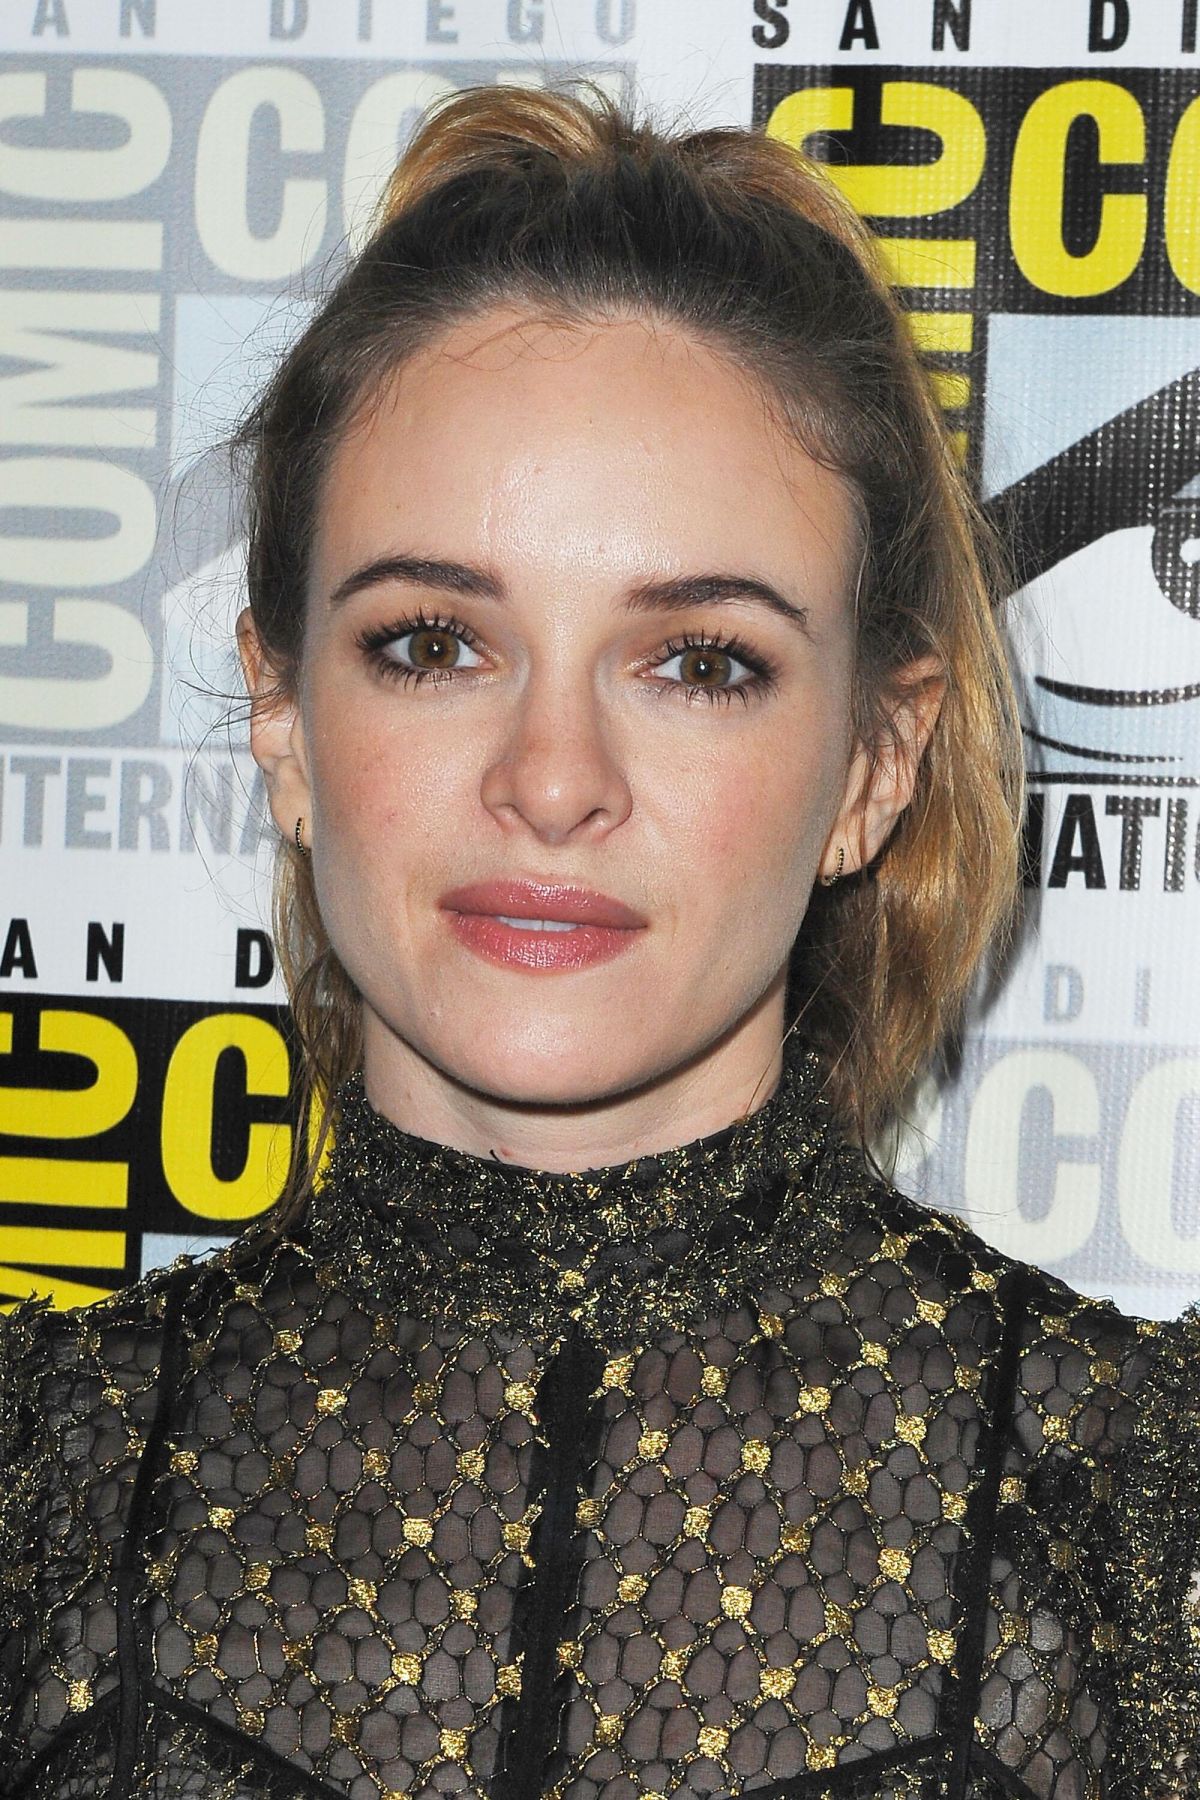 DANIELLE PANABAKER at The Flash Panel at Comic-con in San Diego 07/22/2017